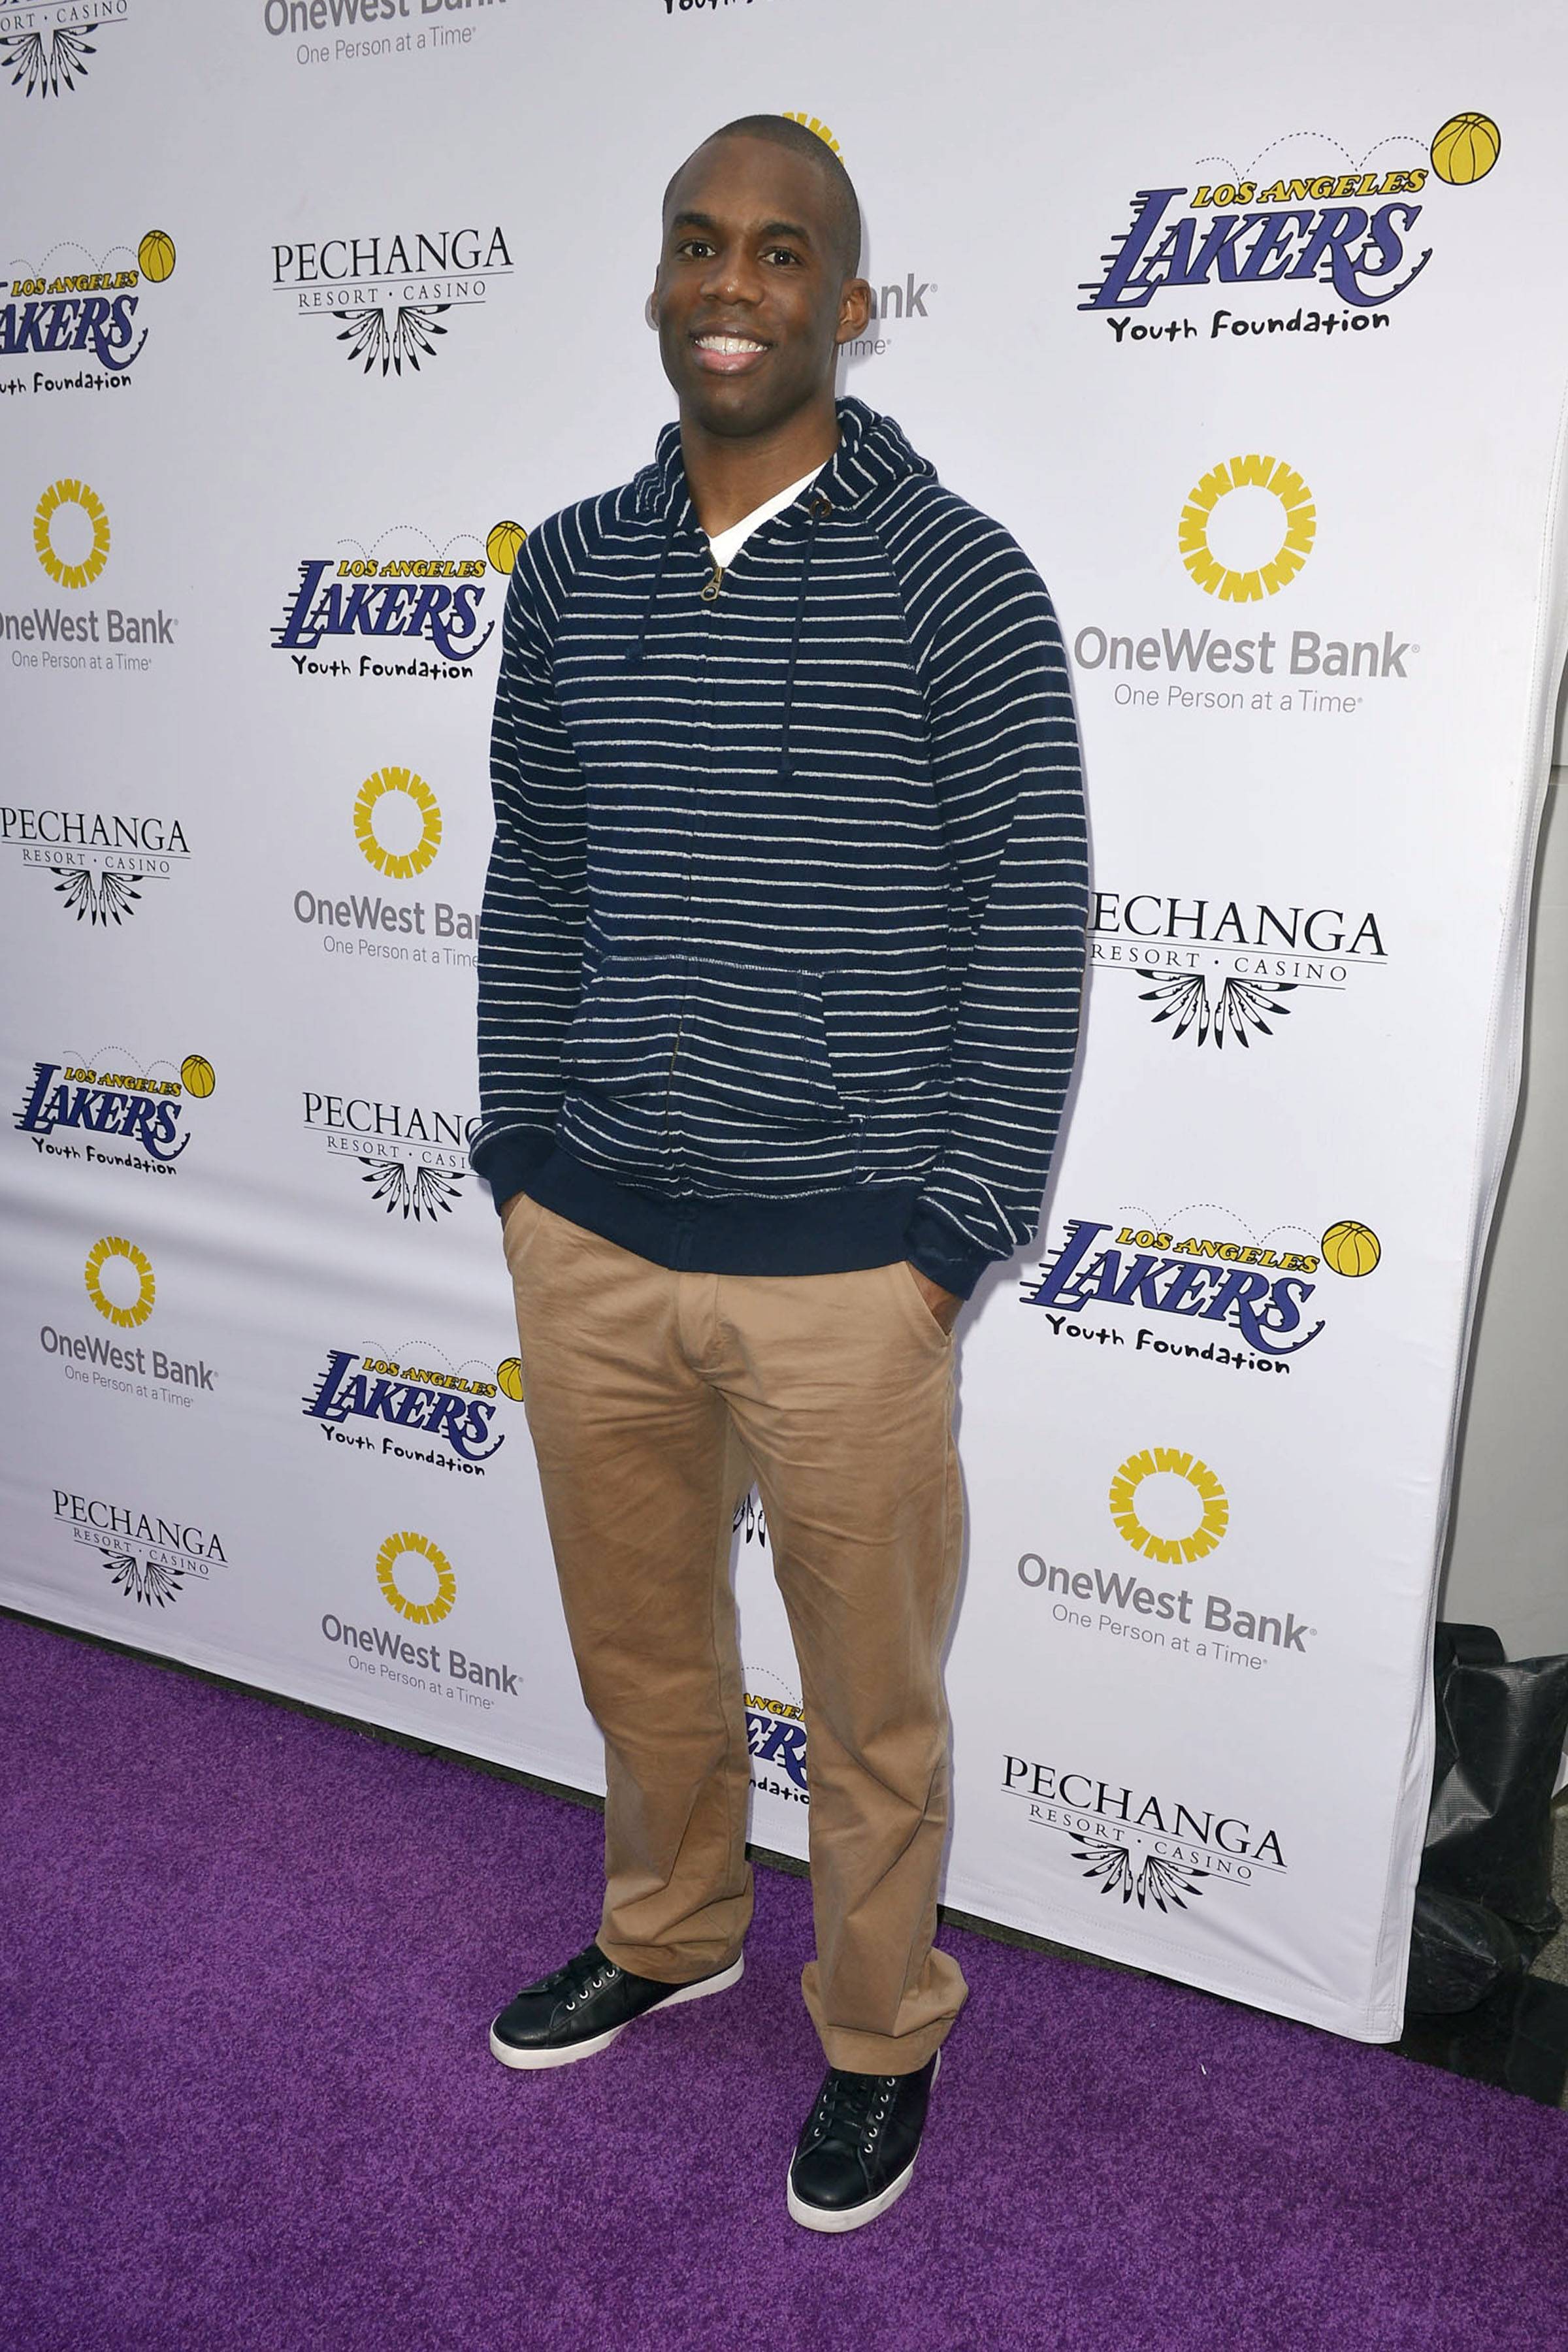 Laker Foundation Event & Party